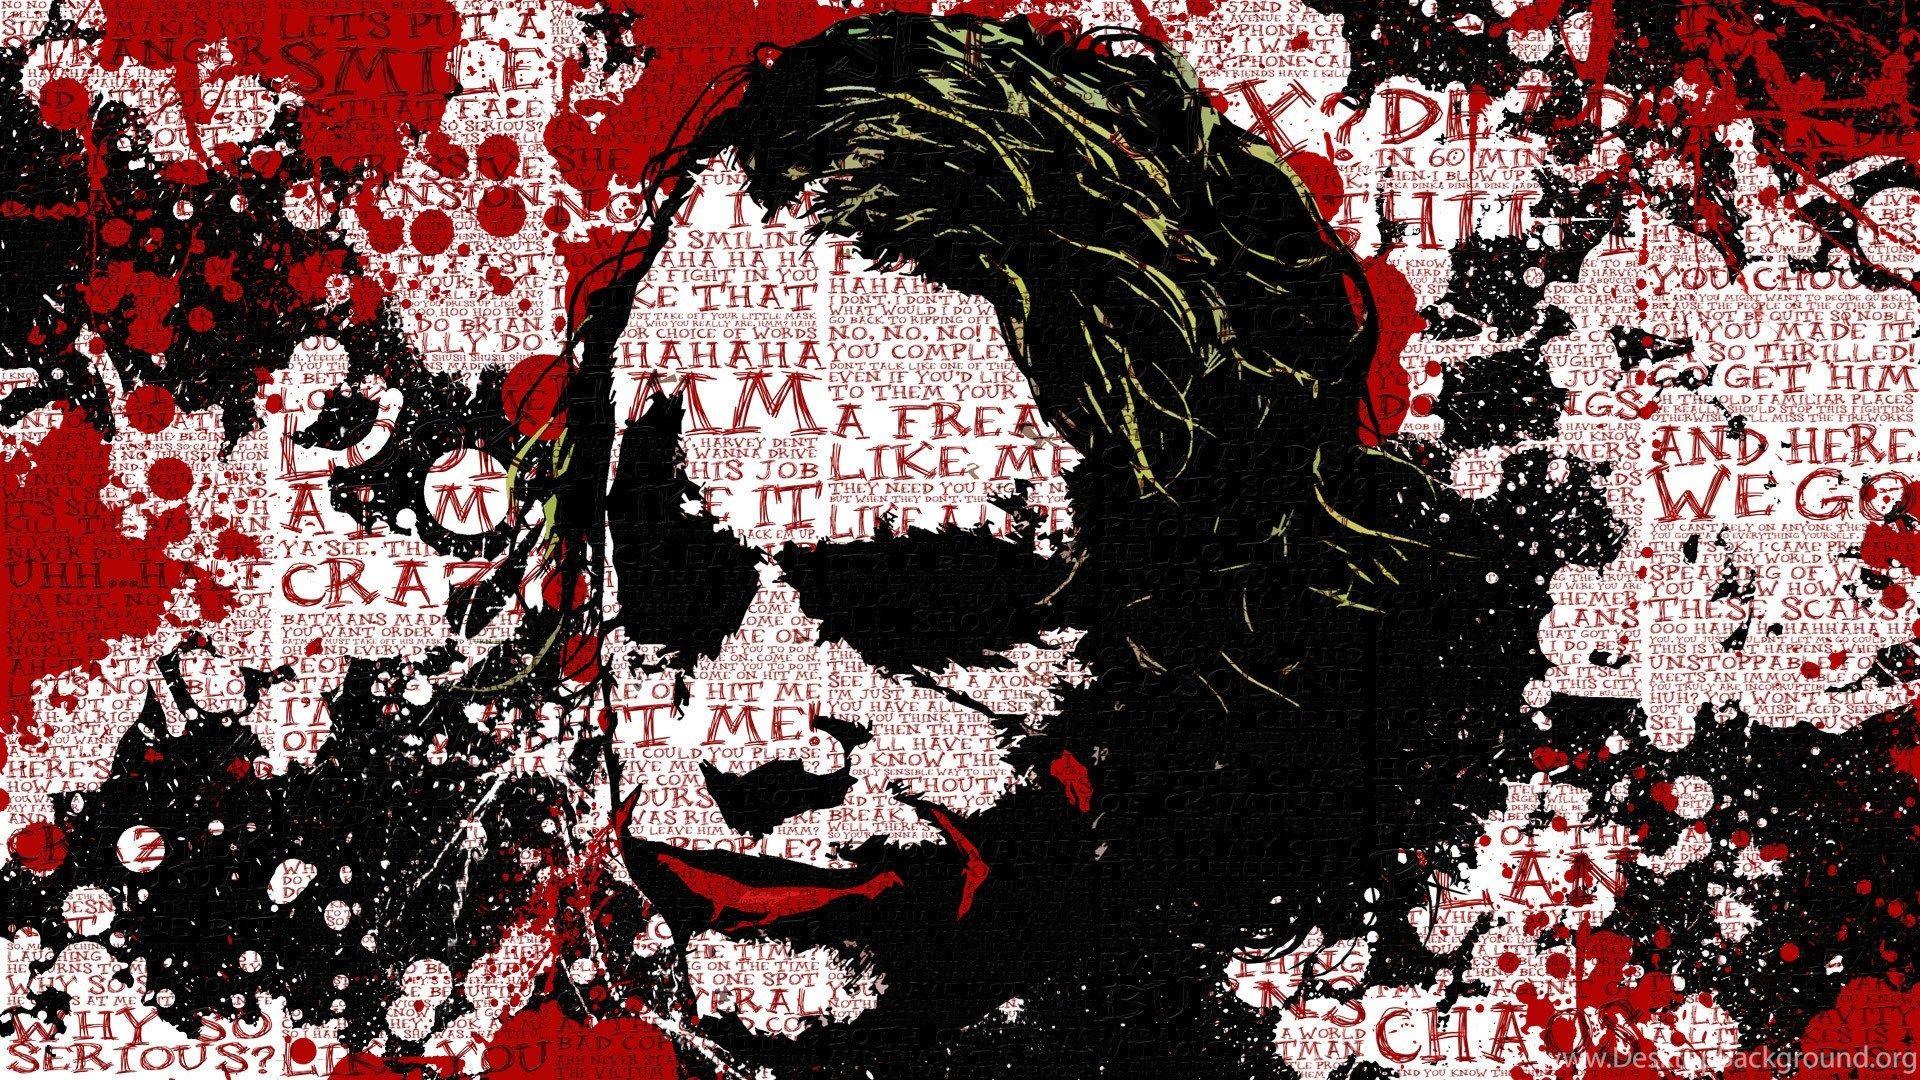 The Joker Quotes Why So Serious Wallpaper. Desktop Background